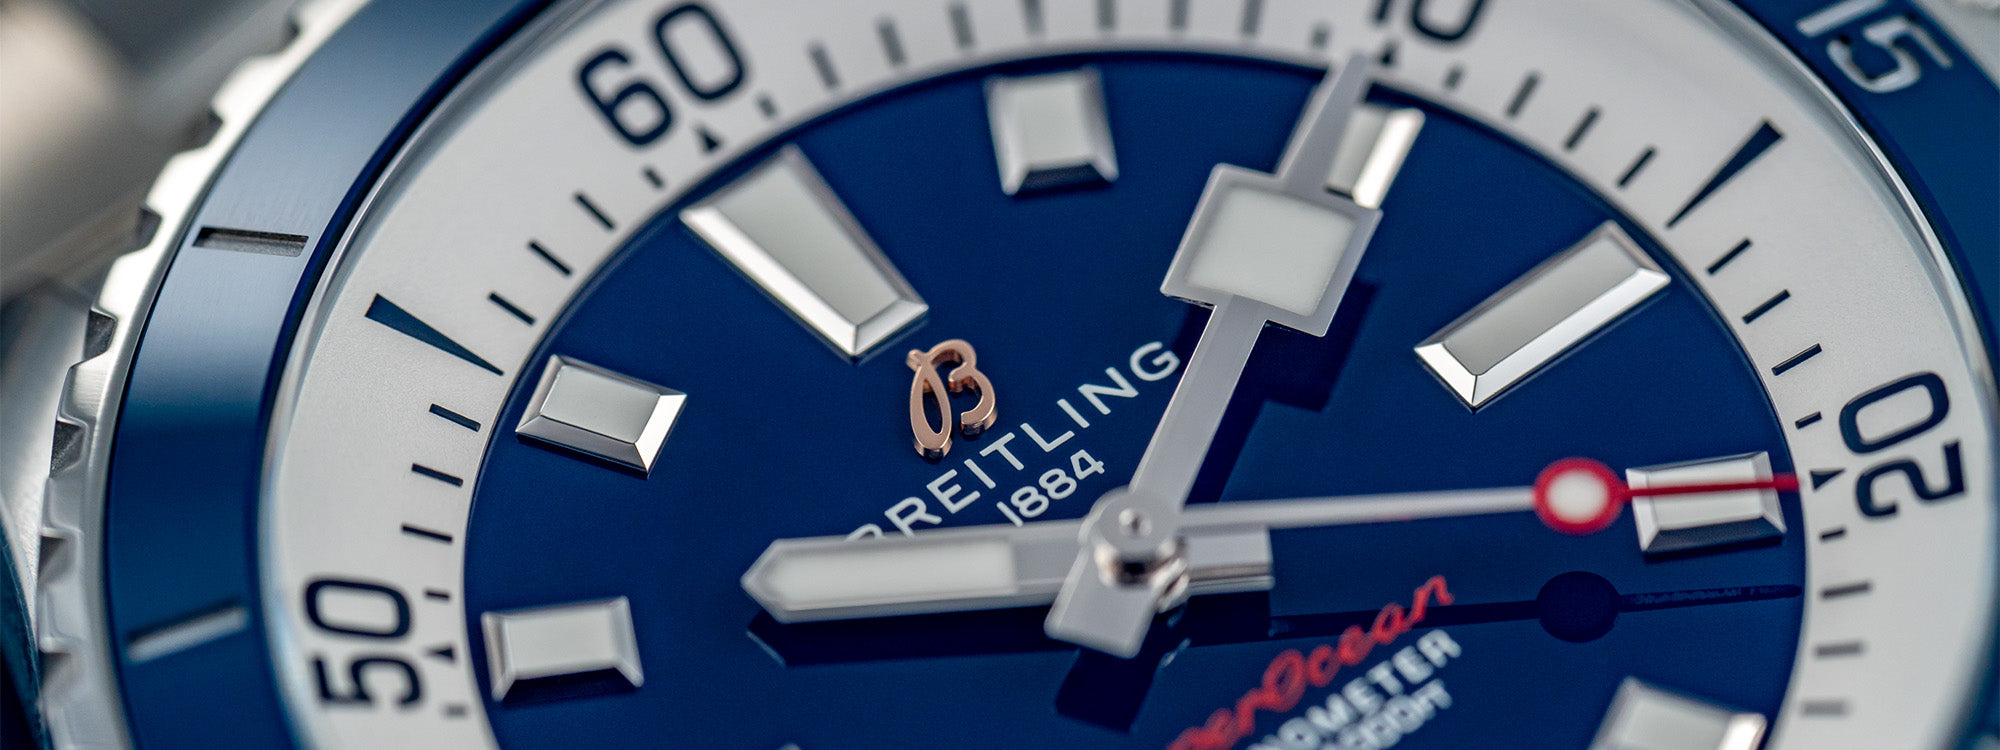 Breitling Superocean and Superocean Heritage: The Ultimate Guide